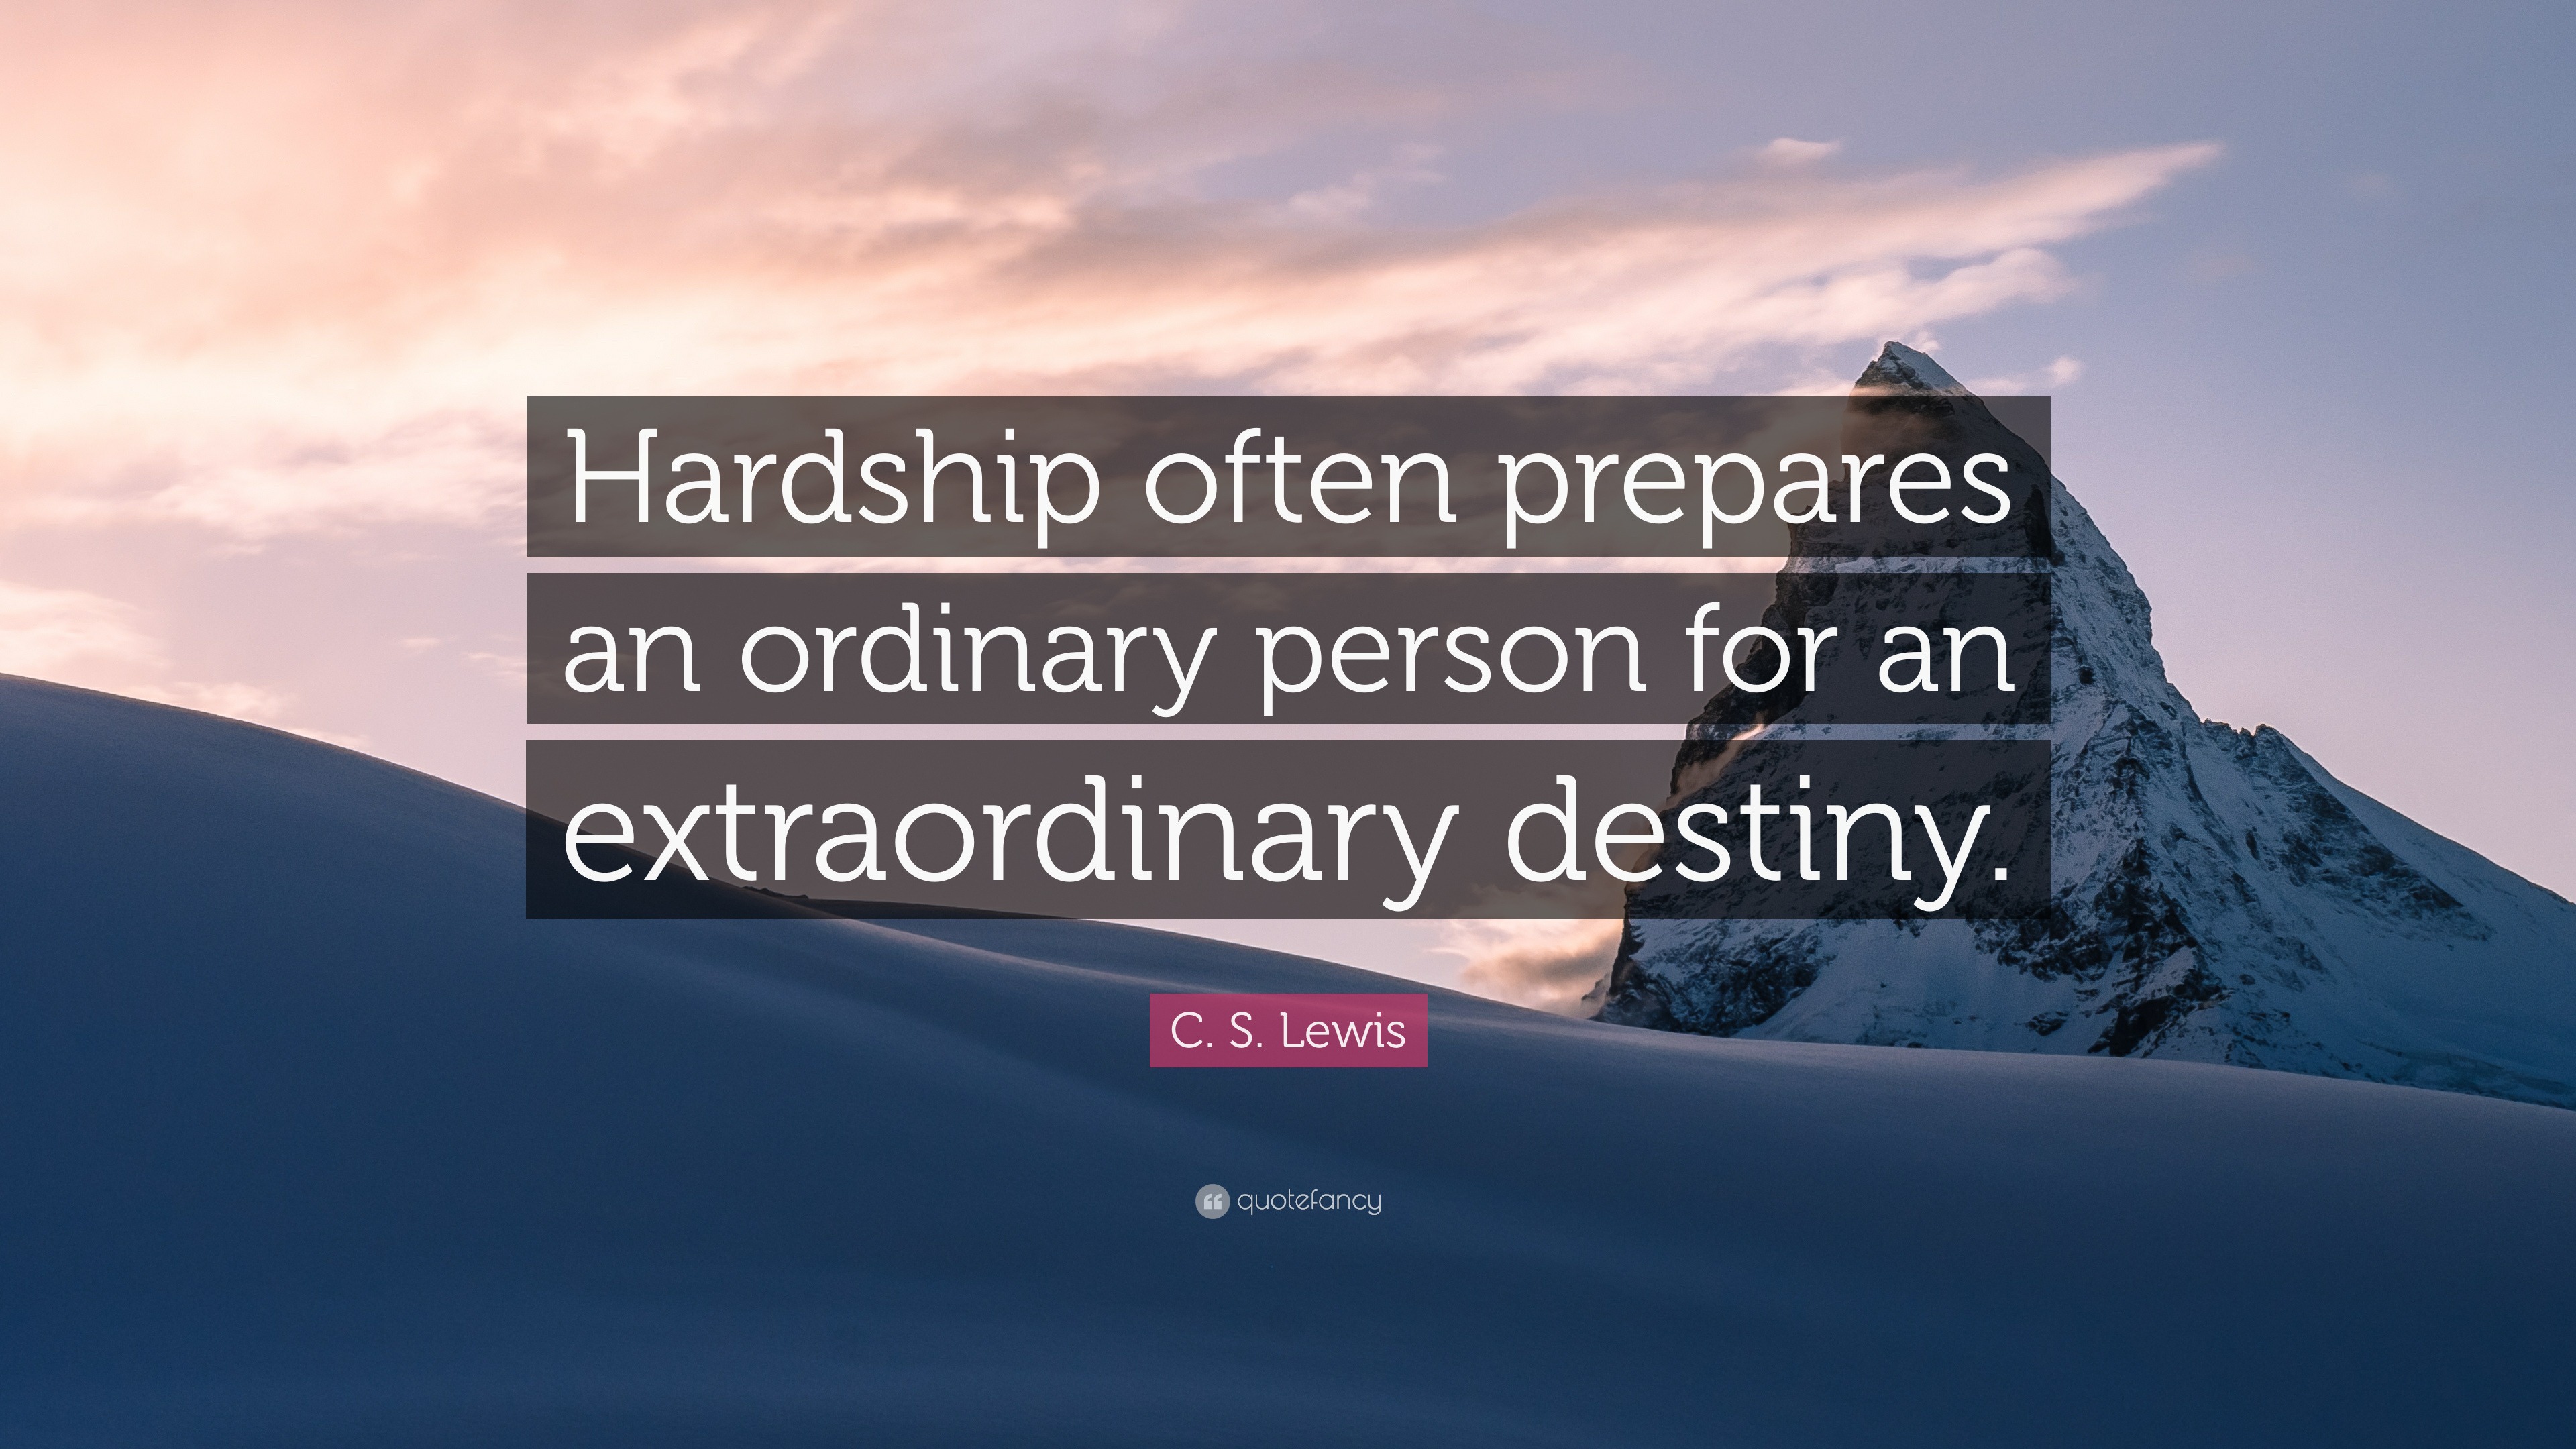 C. S. Lewis Quote: “Hardship often prepares an ordinary person for an